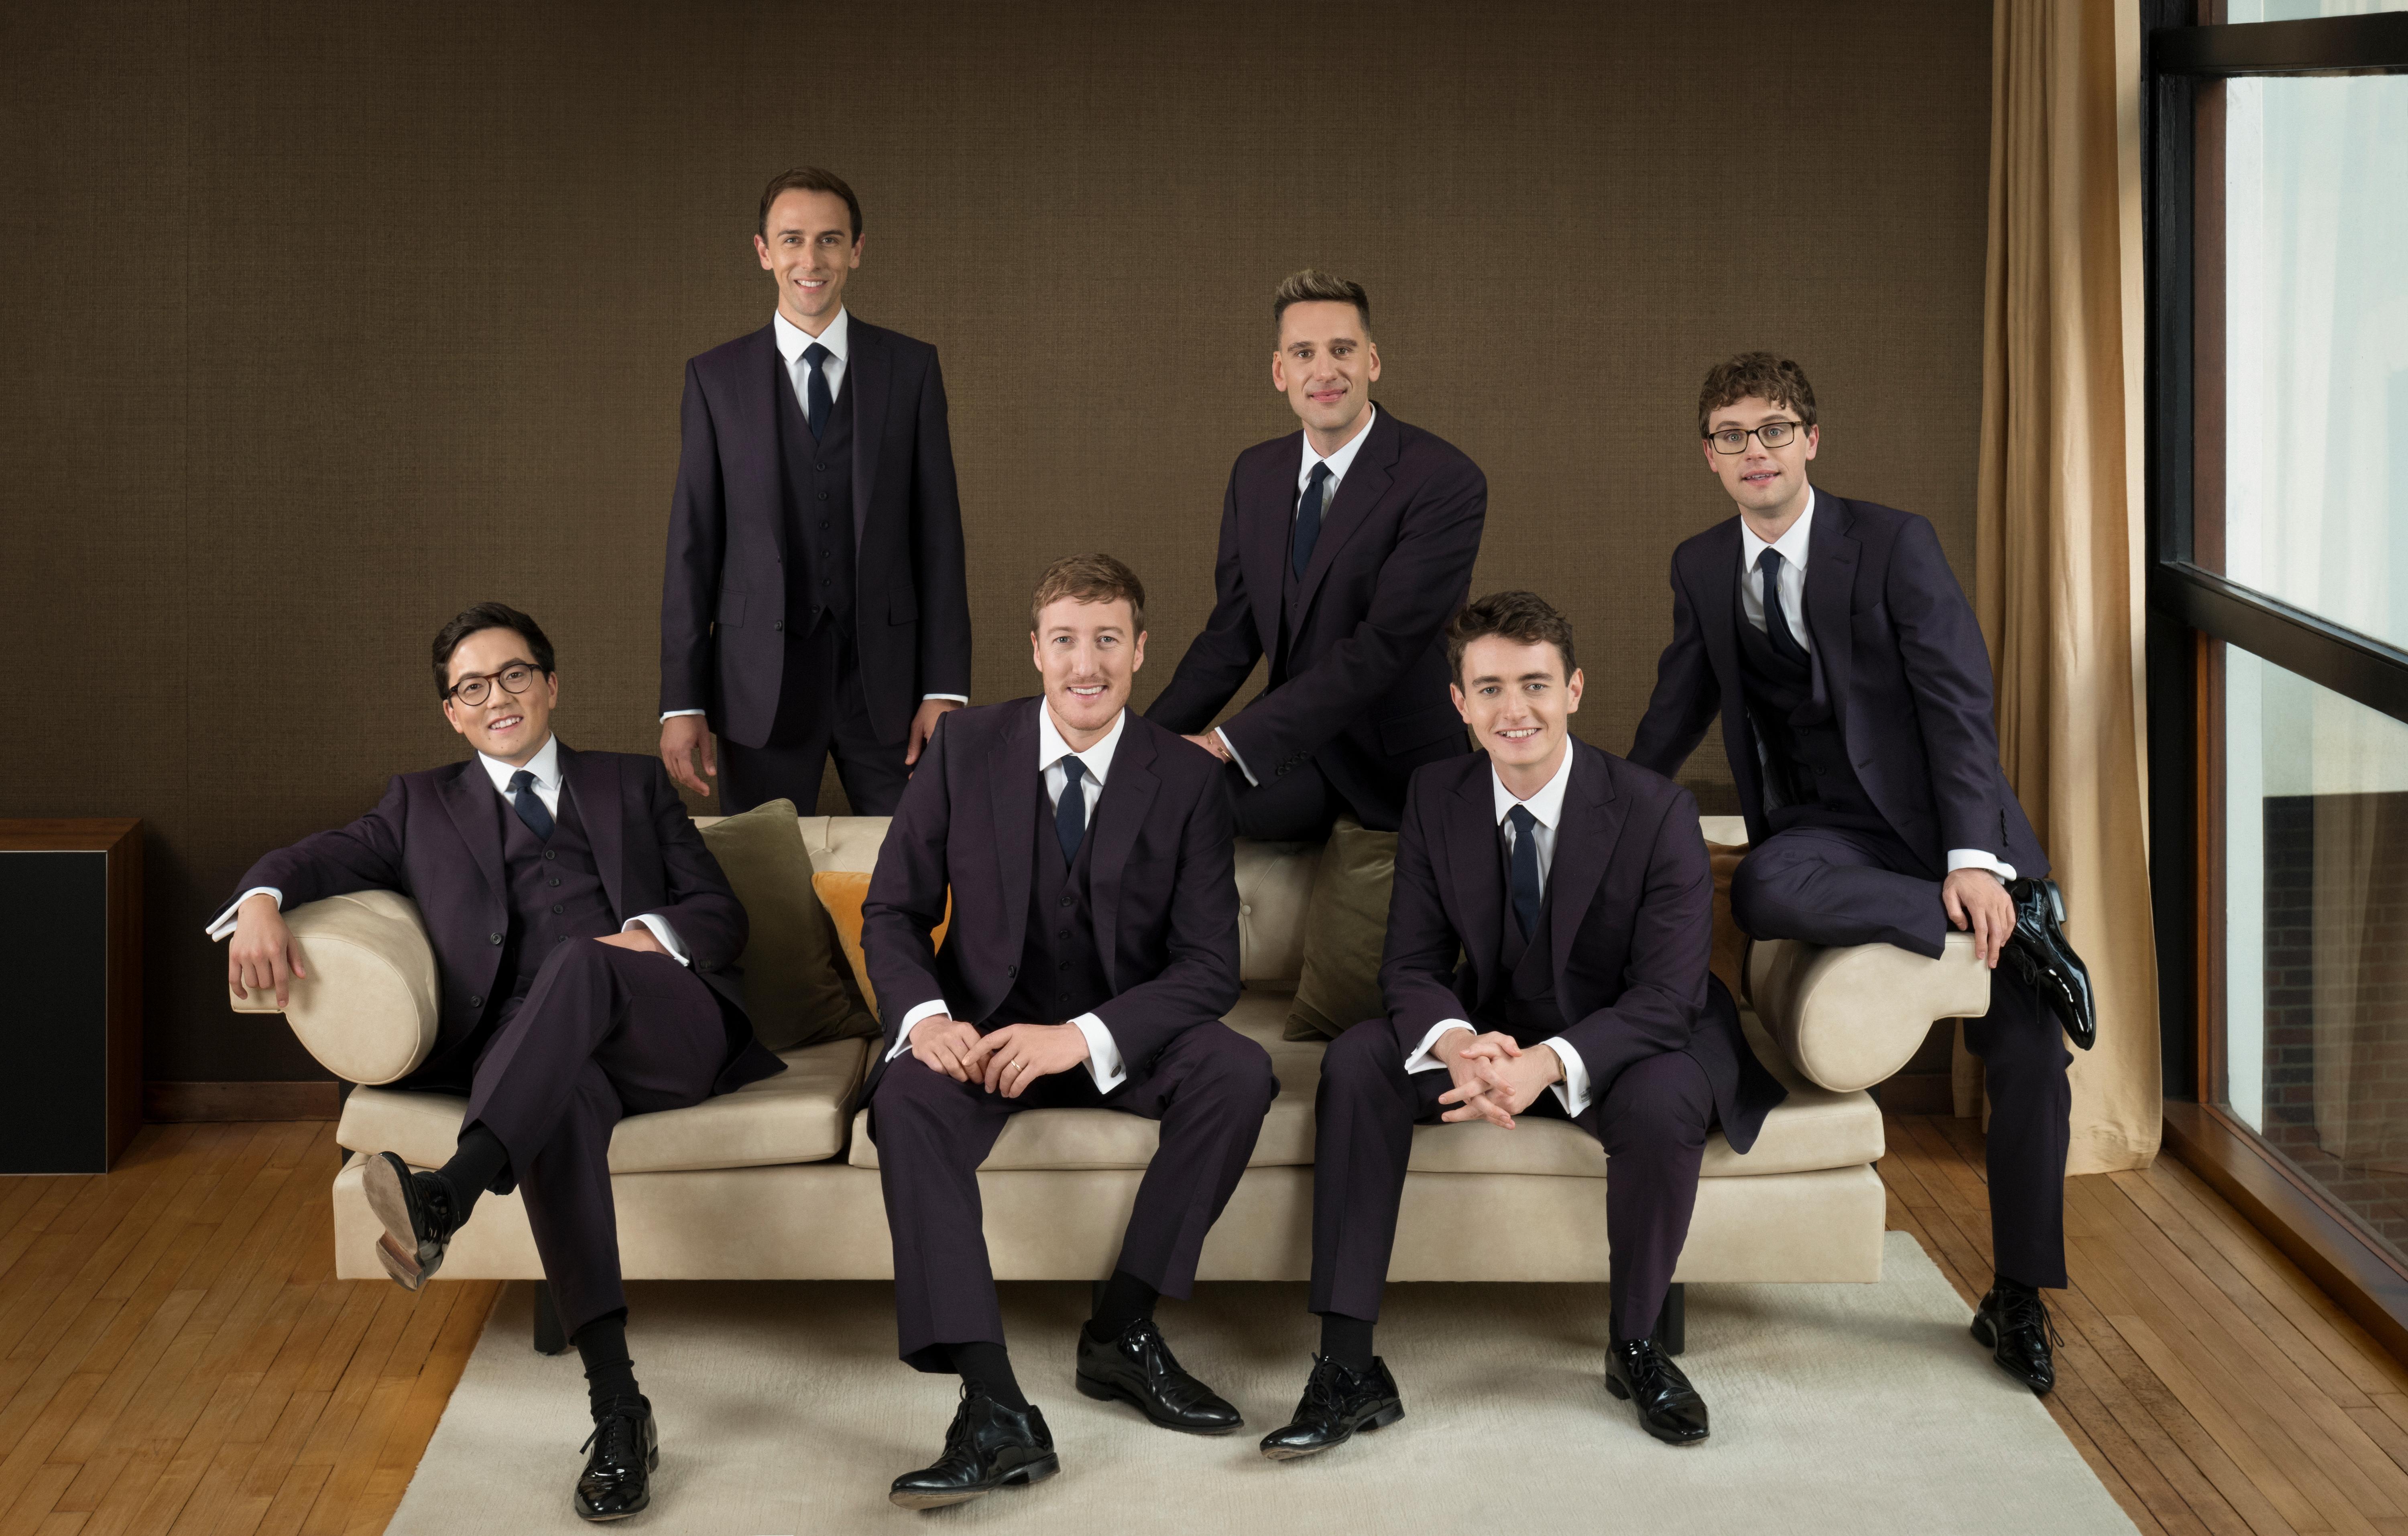 The King's Singers (UK)